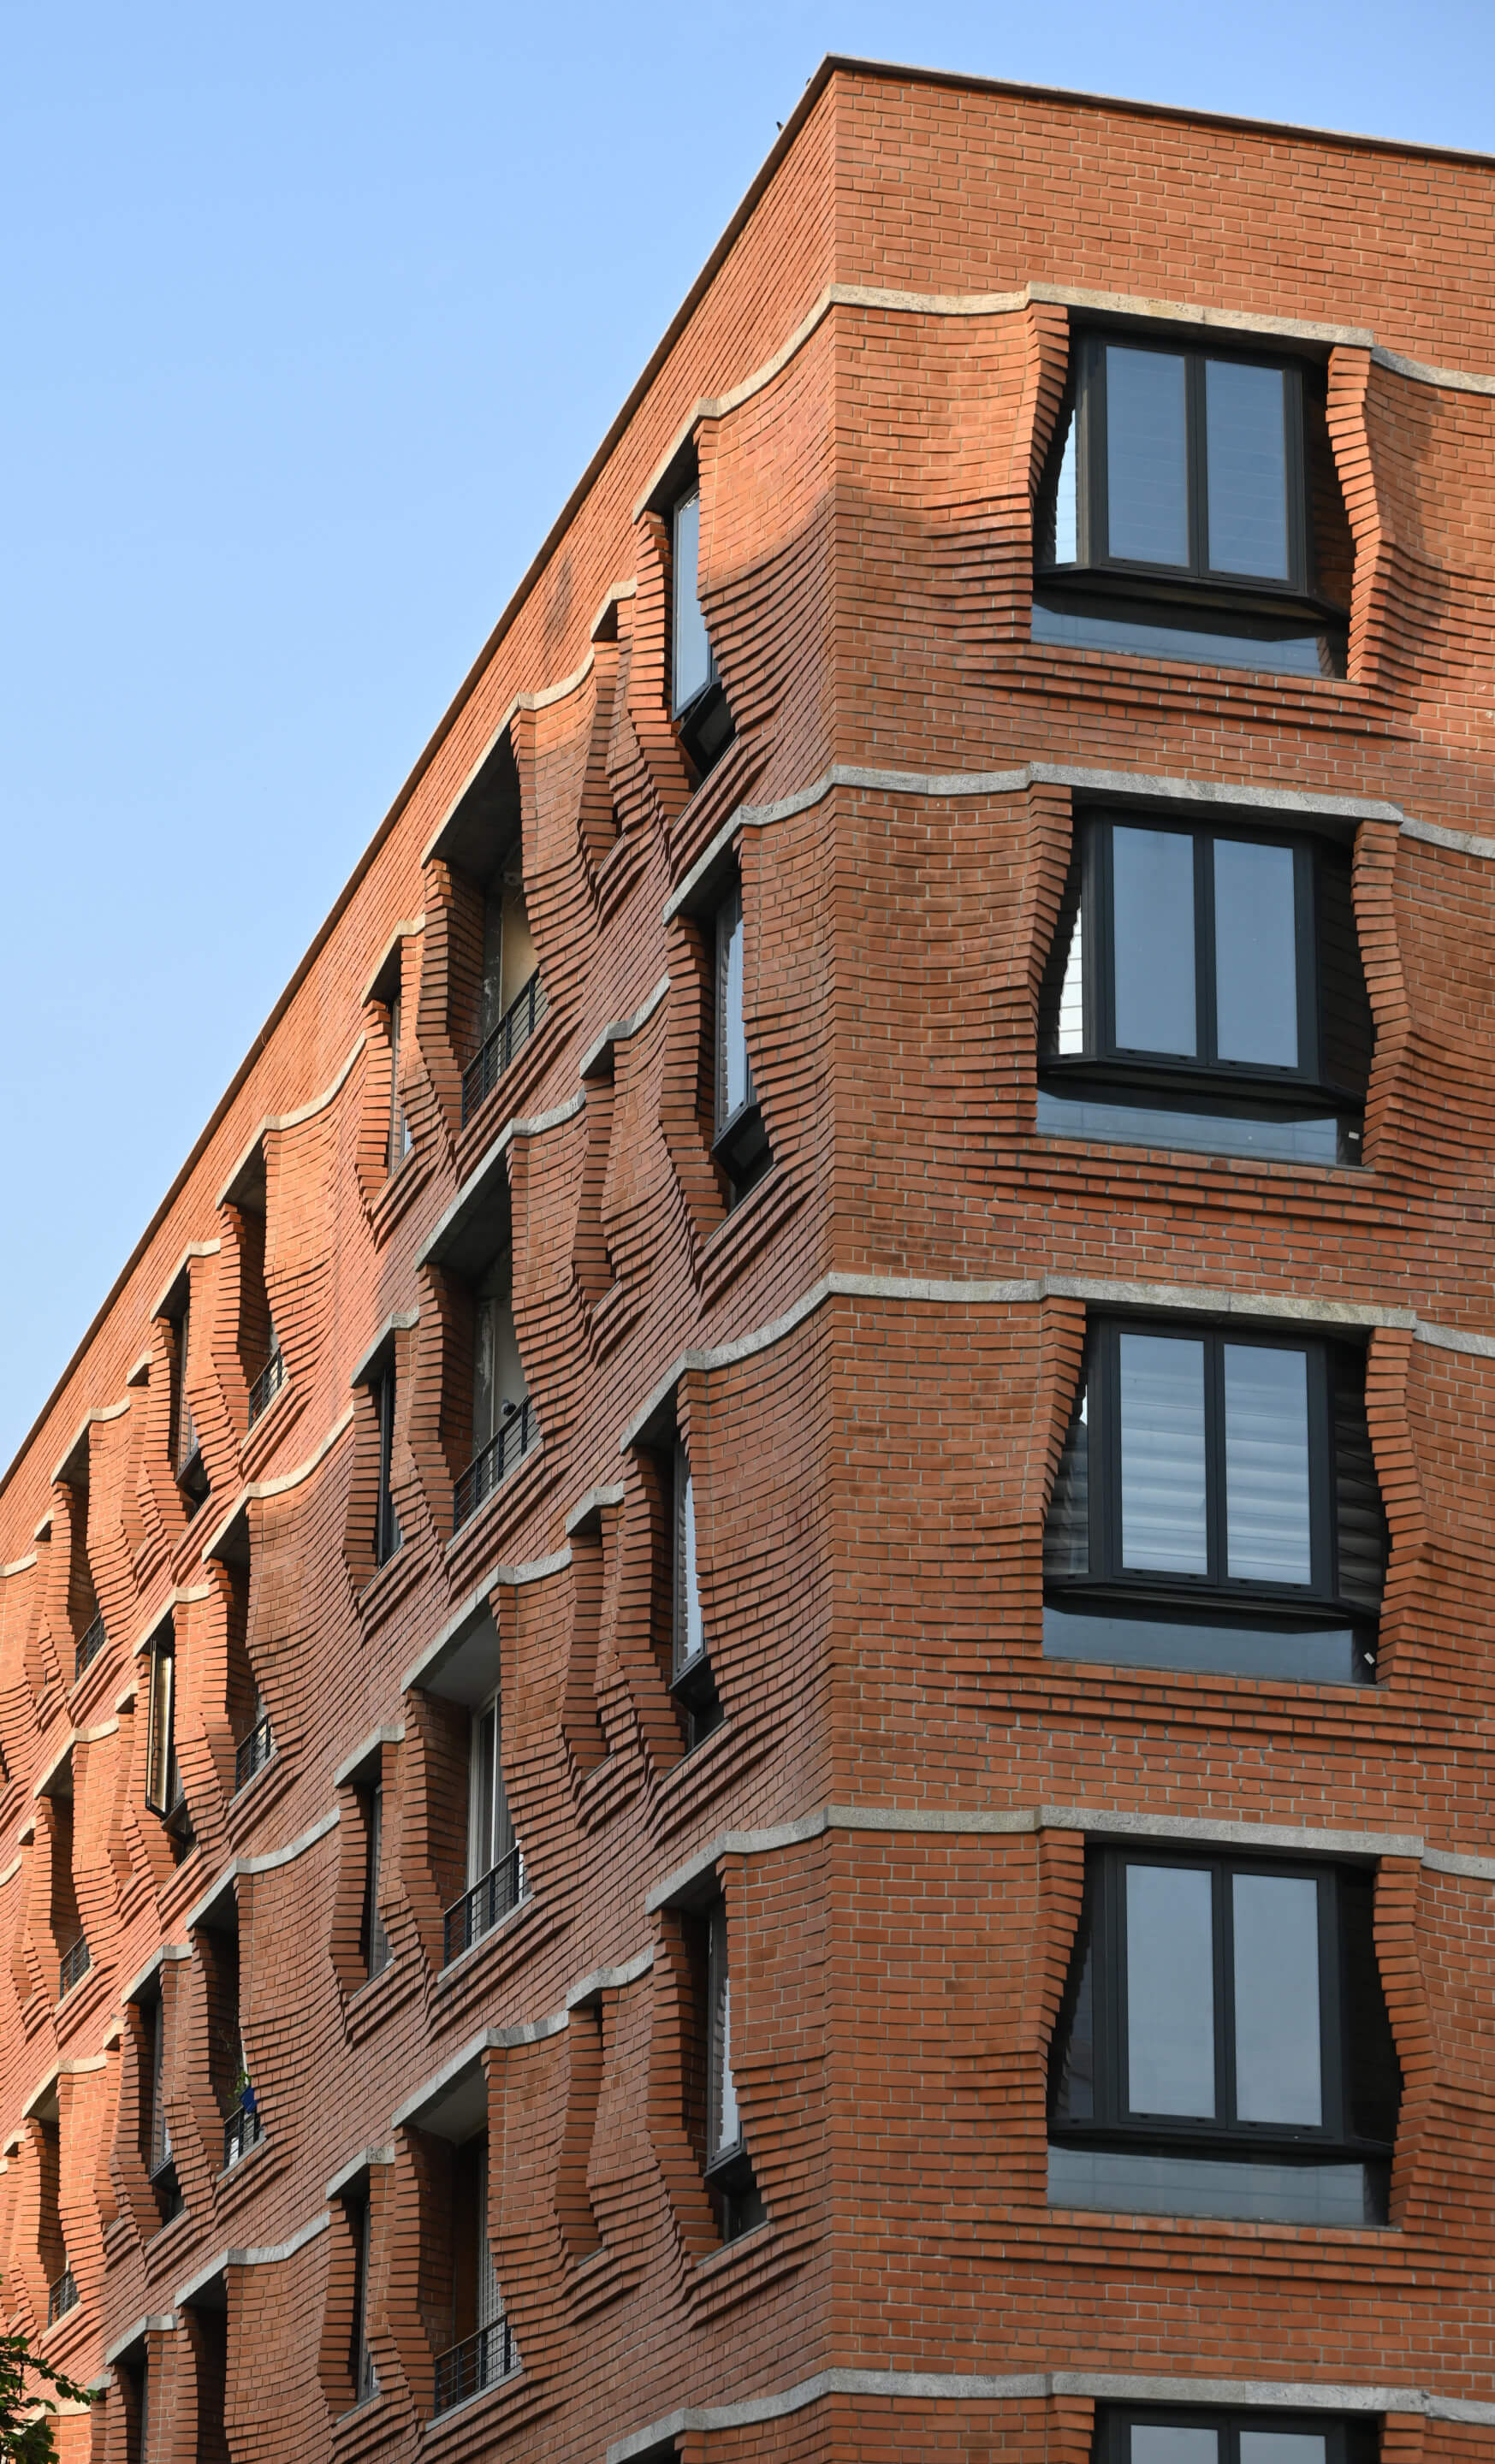 A towering brick apartment complex with corbeled brick called Sienna